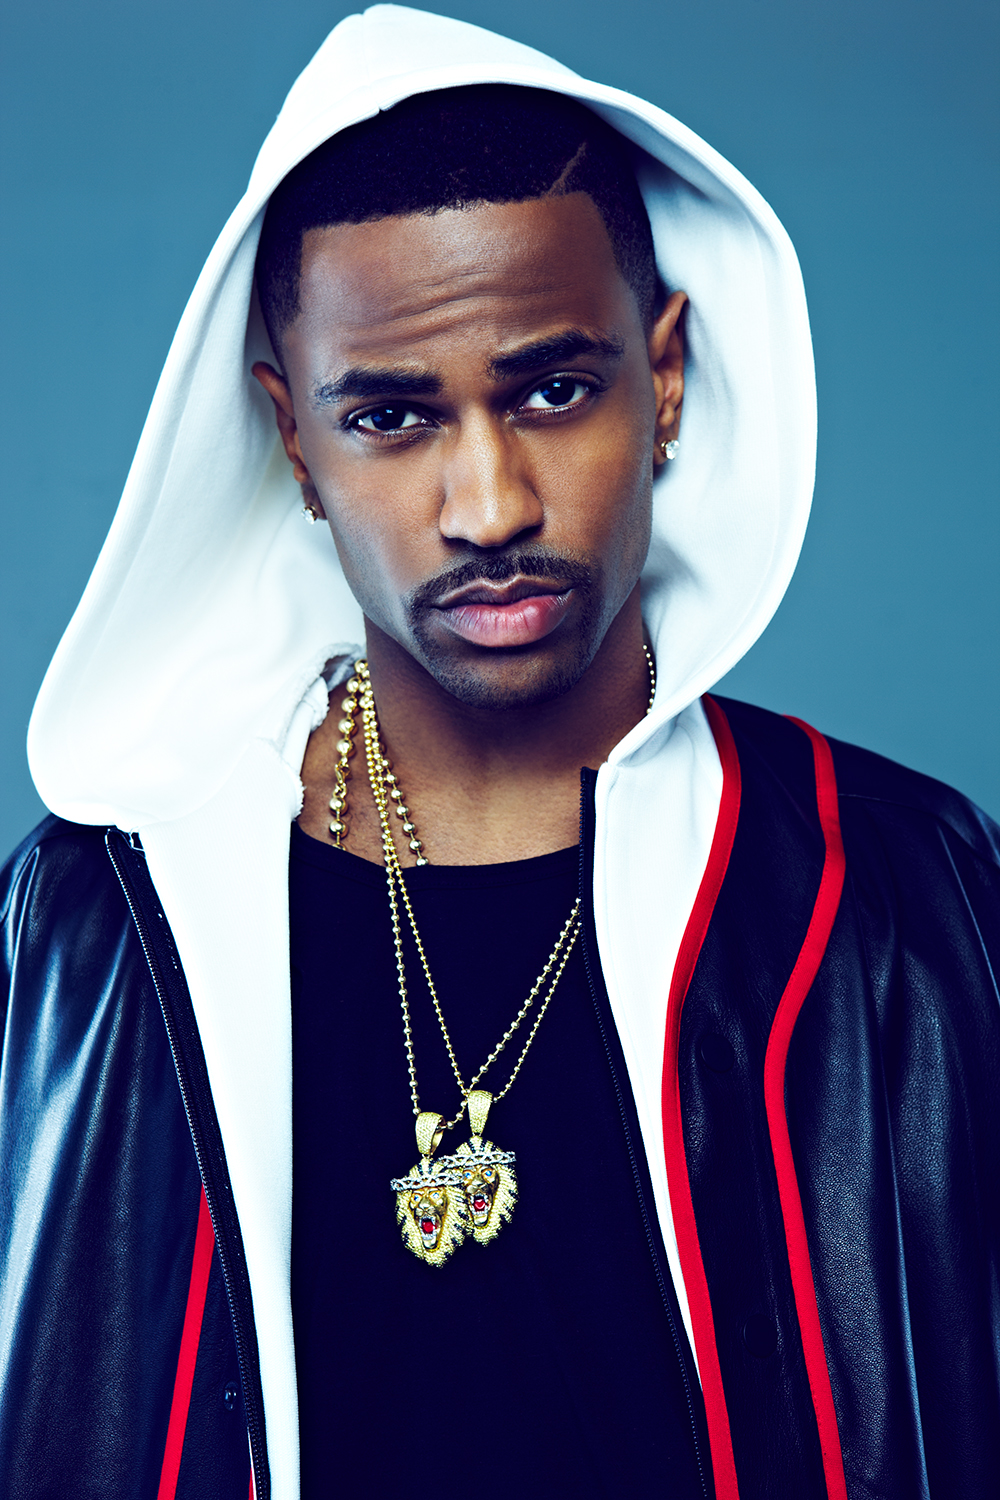 Quotes From Big Sean